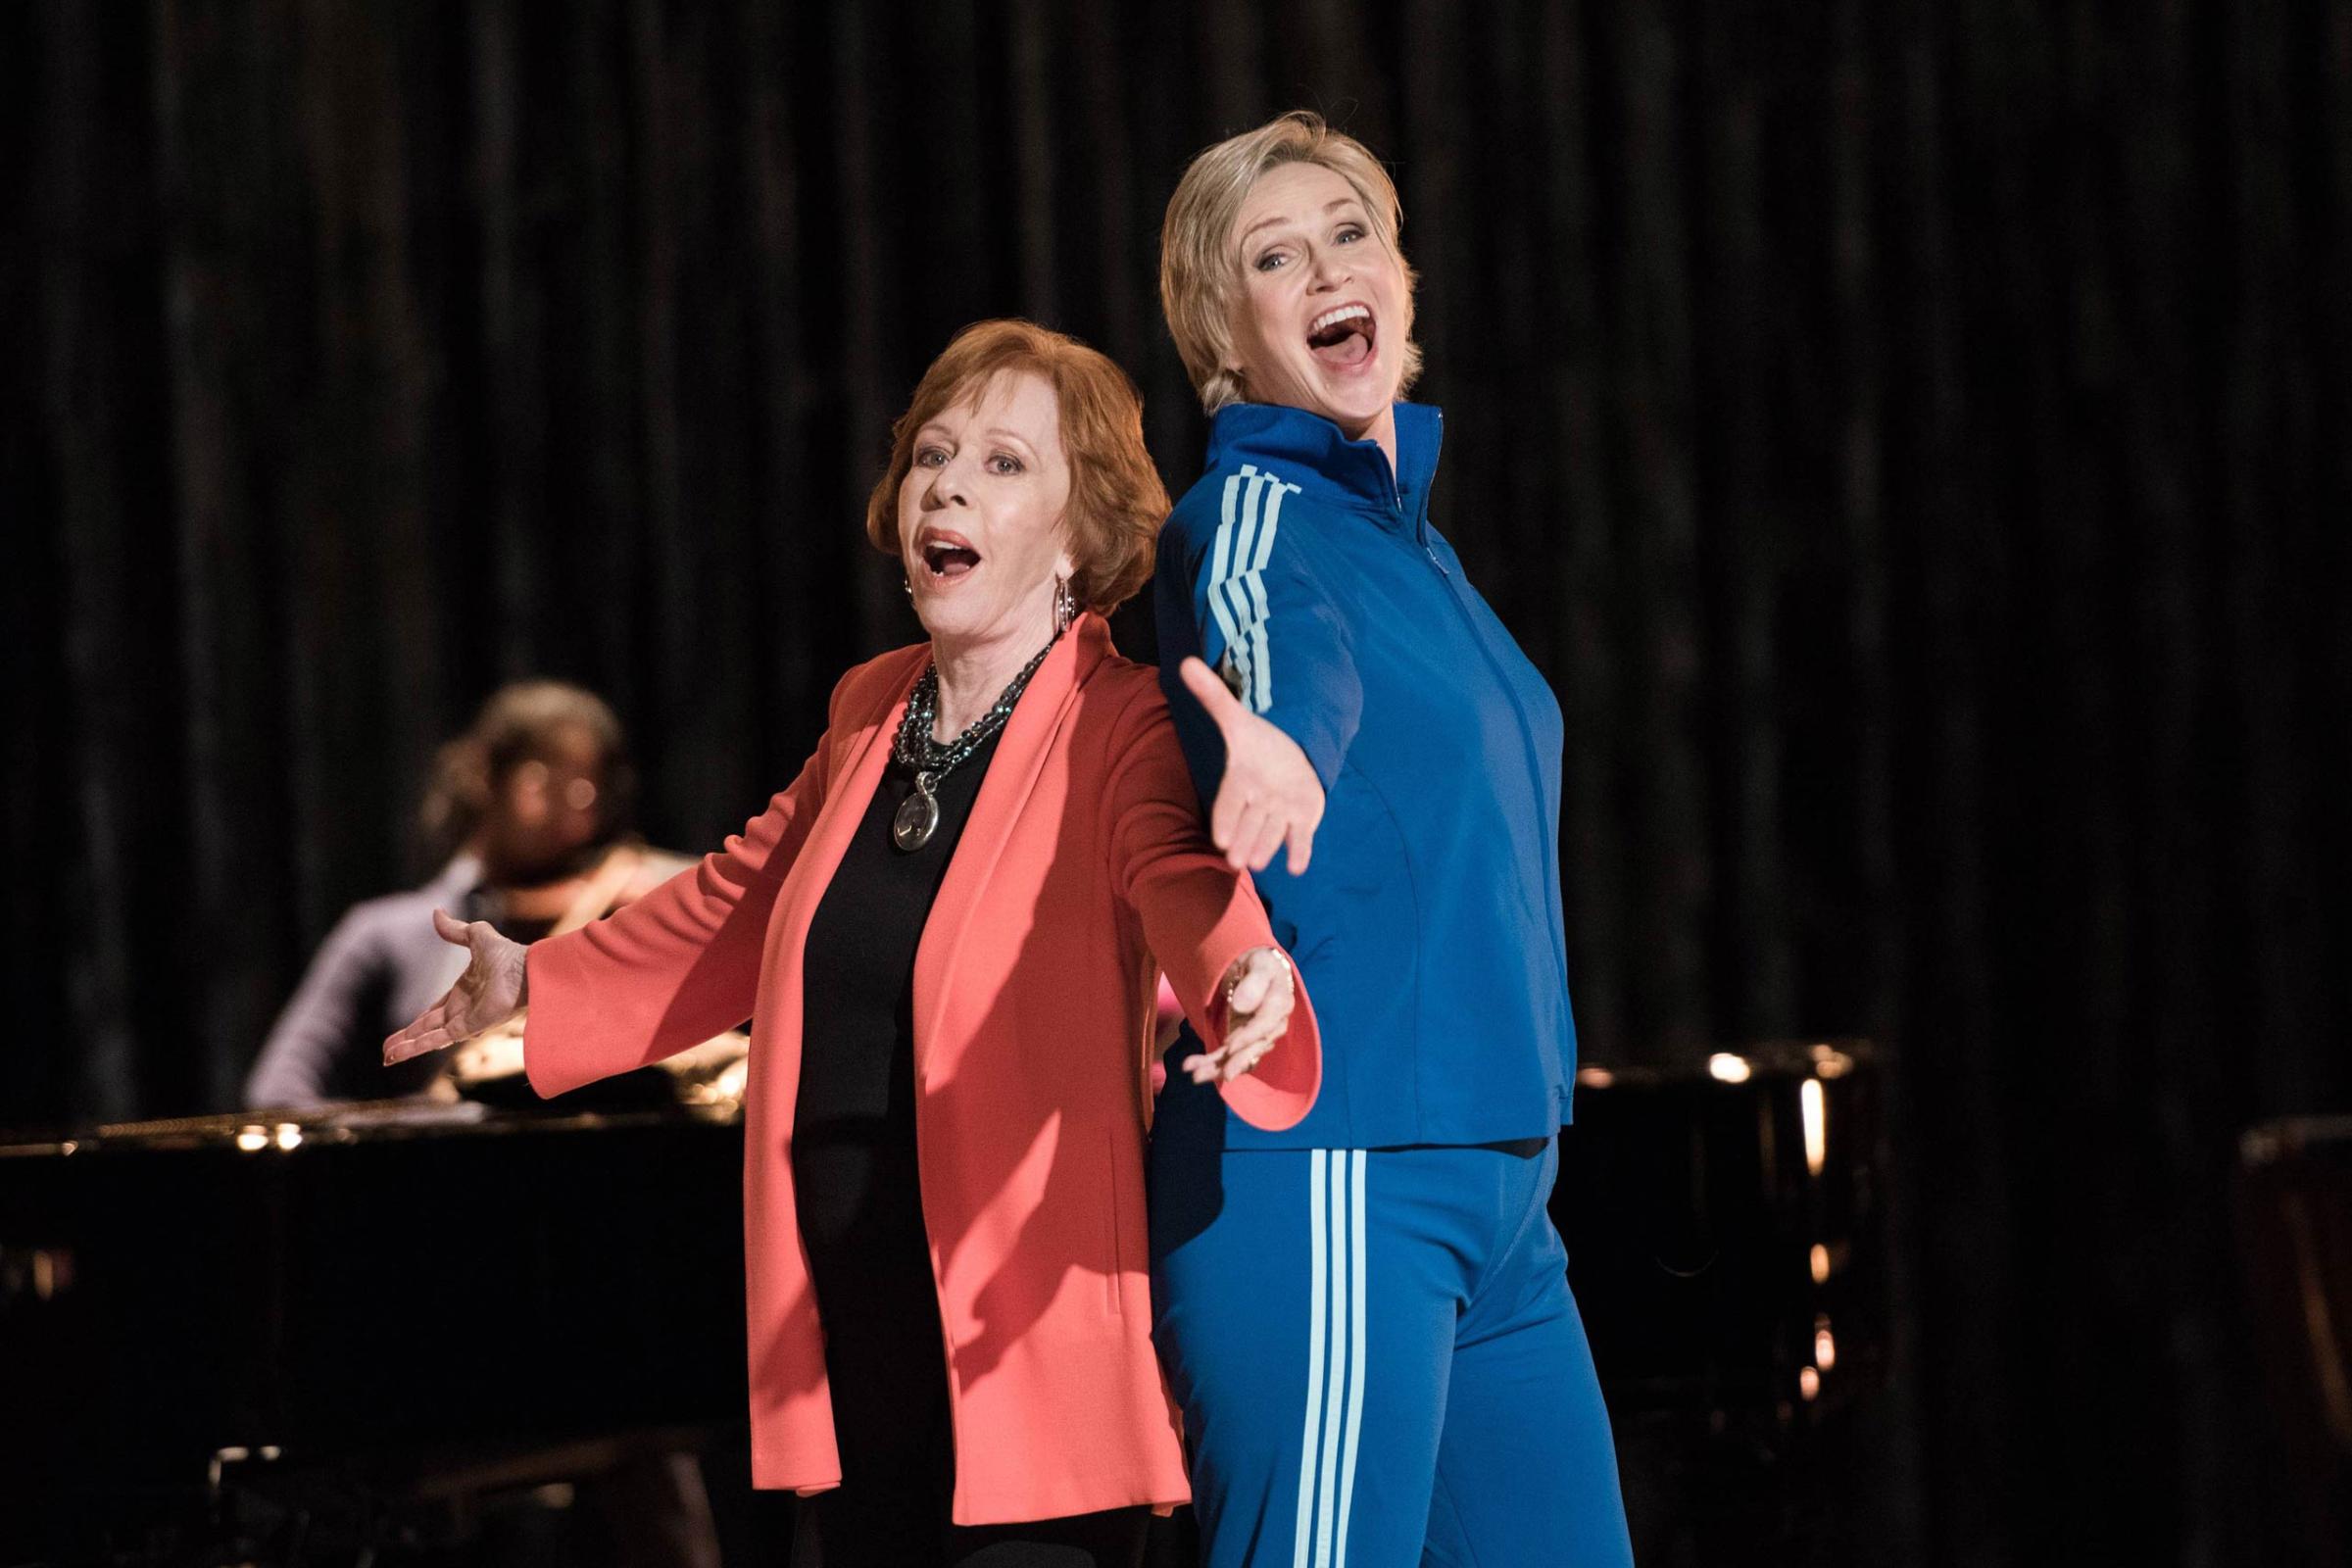 GLEE: Guest star Carol Burnett (L) and Sue (Jane Lynch, R) perform in the "The Rise and Fall of Sue Sylvester" episode of GLEE airing Friday, March 6 (9:00-10:00 PM ET/PT) on FOX. ©2015 Fox Broadcasting Co. CR: Eddy Chen/FOX